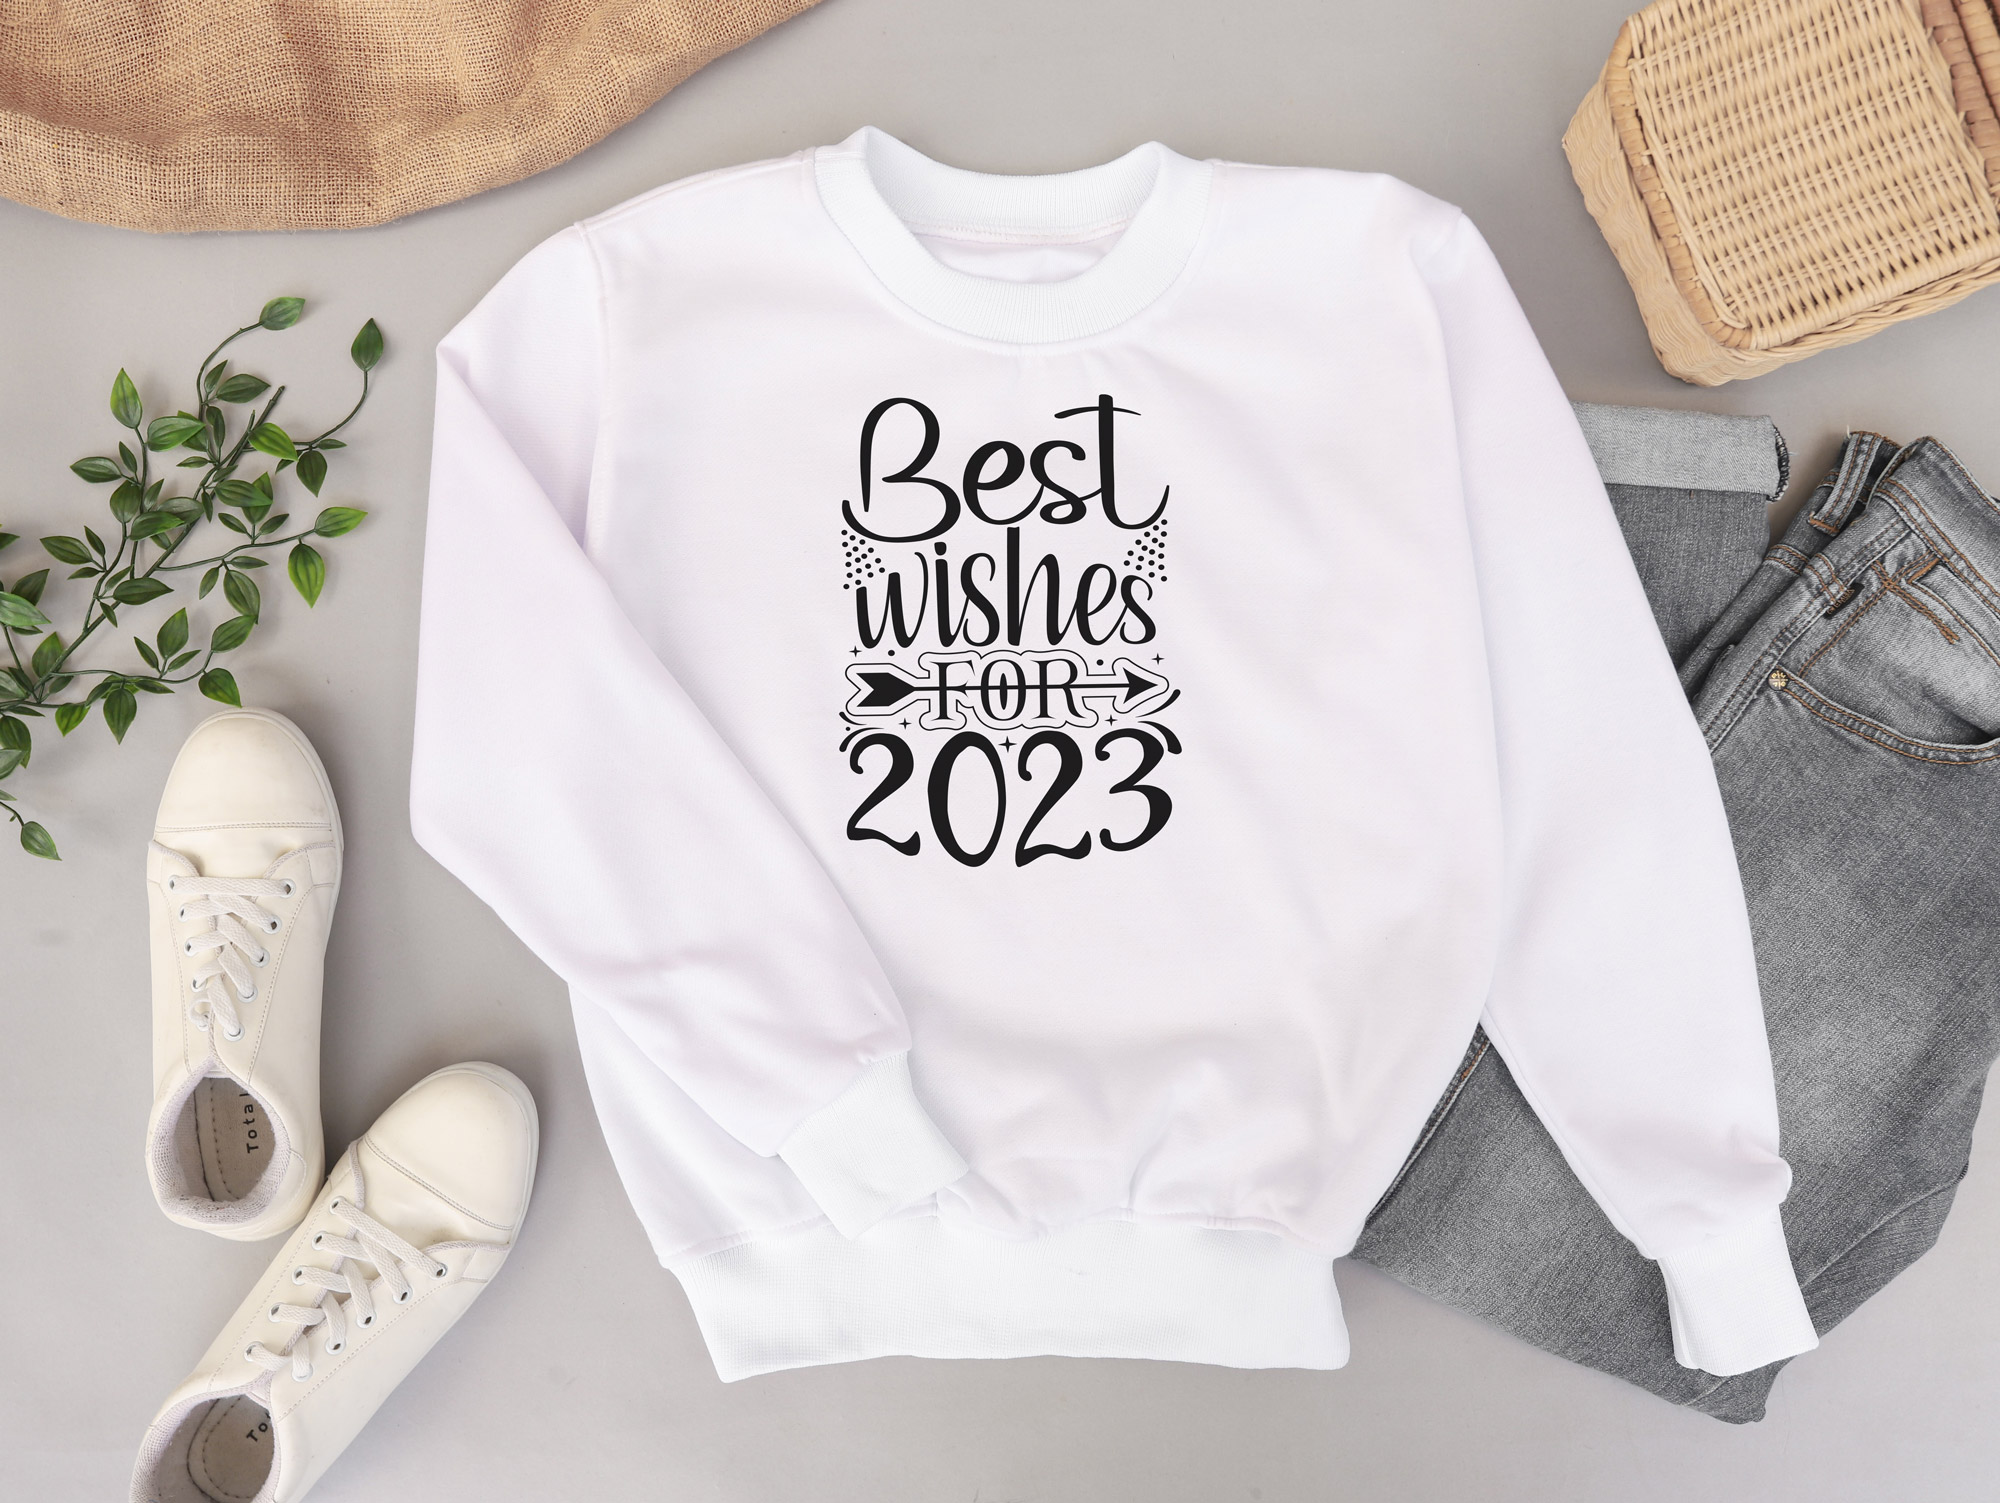 Image of a white t-shirt with a wonderful inscription Best wishes for 2023